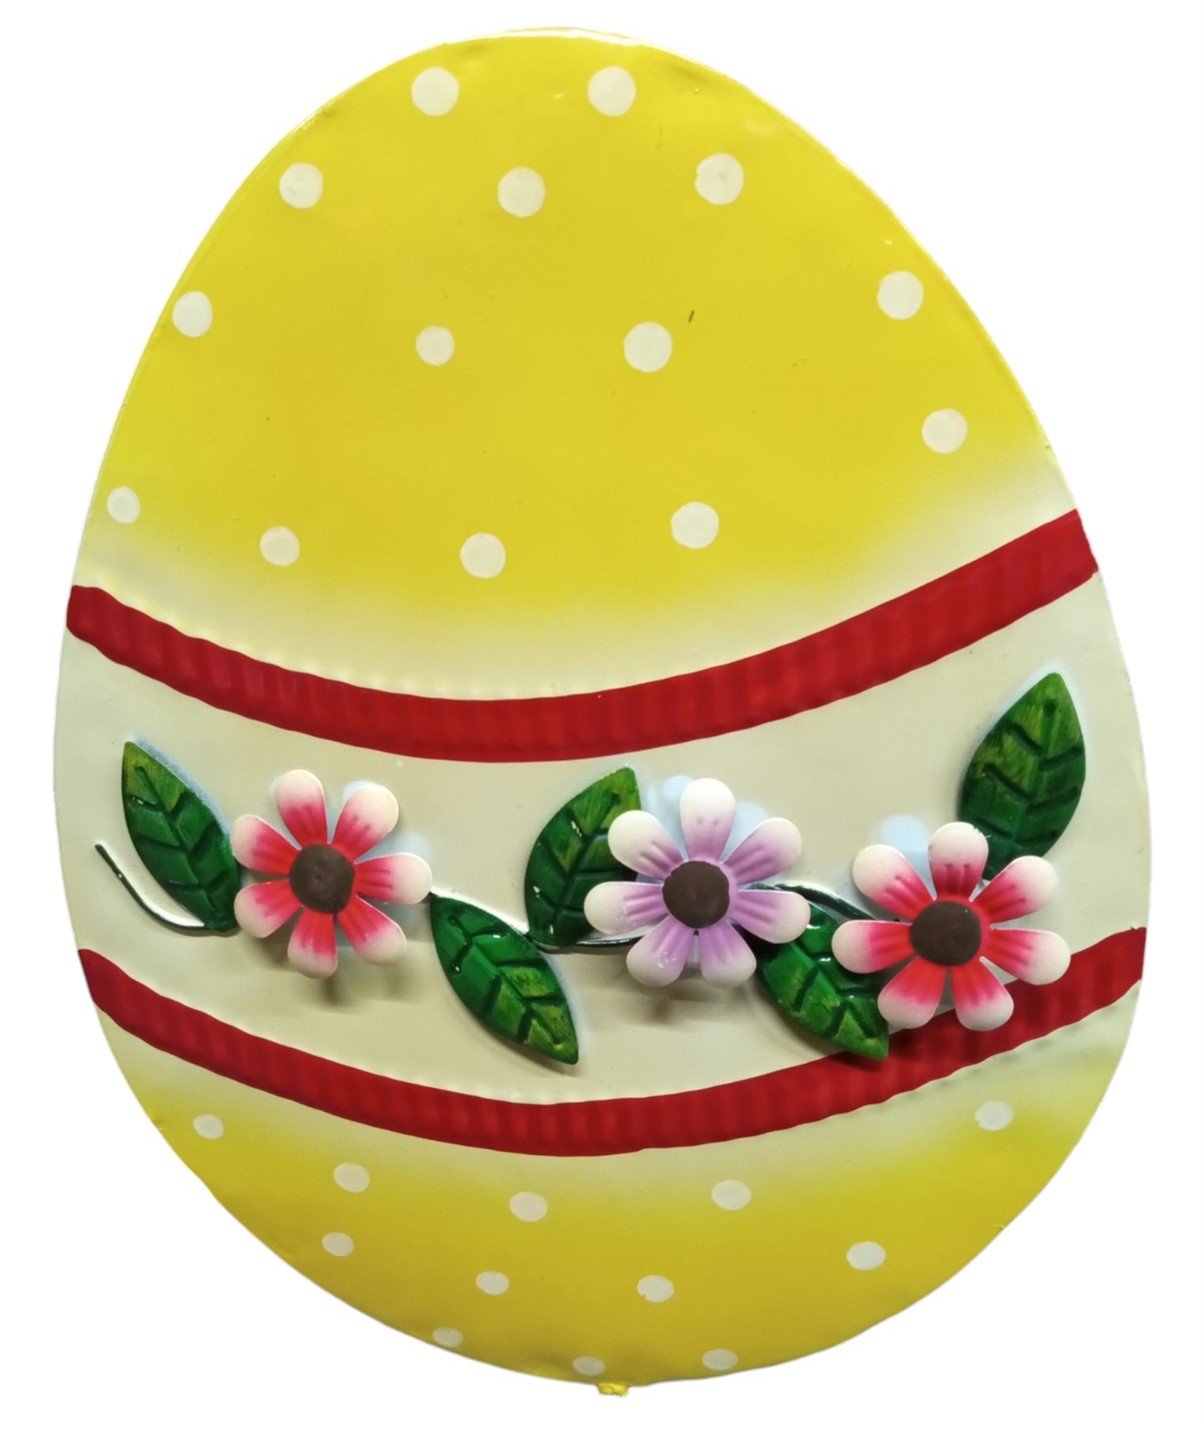 Handcrafted Easter Yellow Metal Egg Yard Art Holiday Spring Outdoor Yard Decor